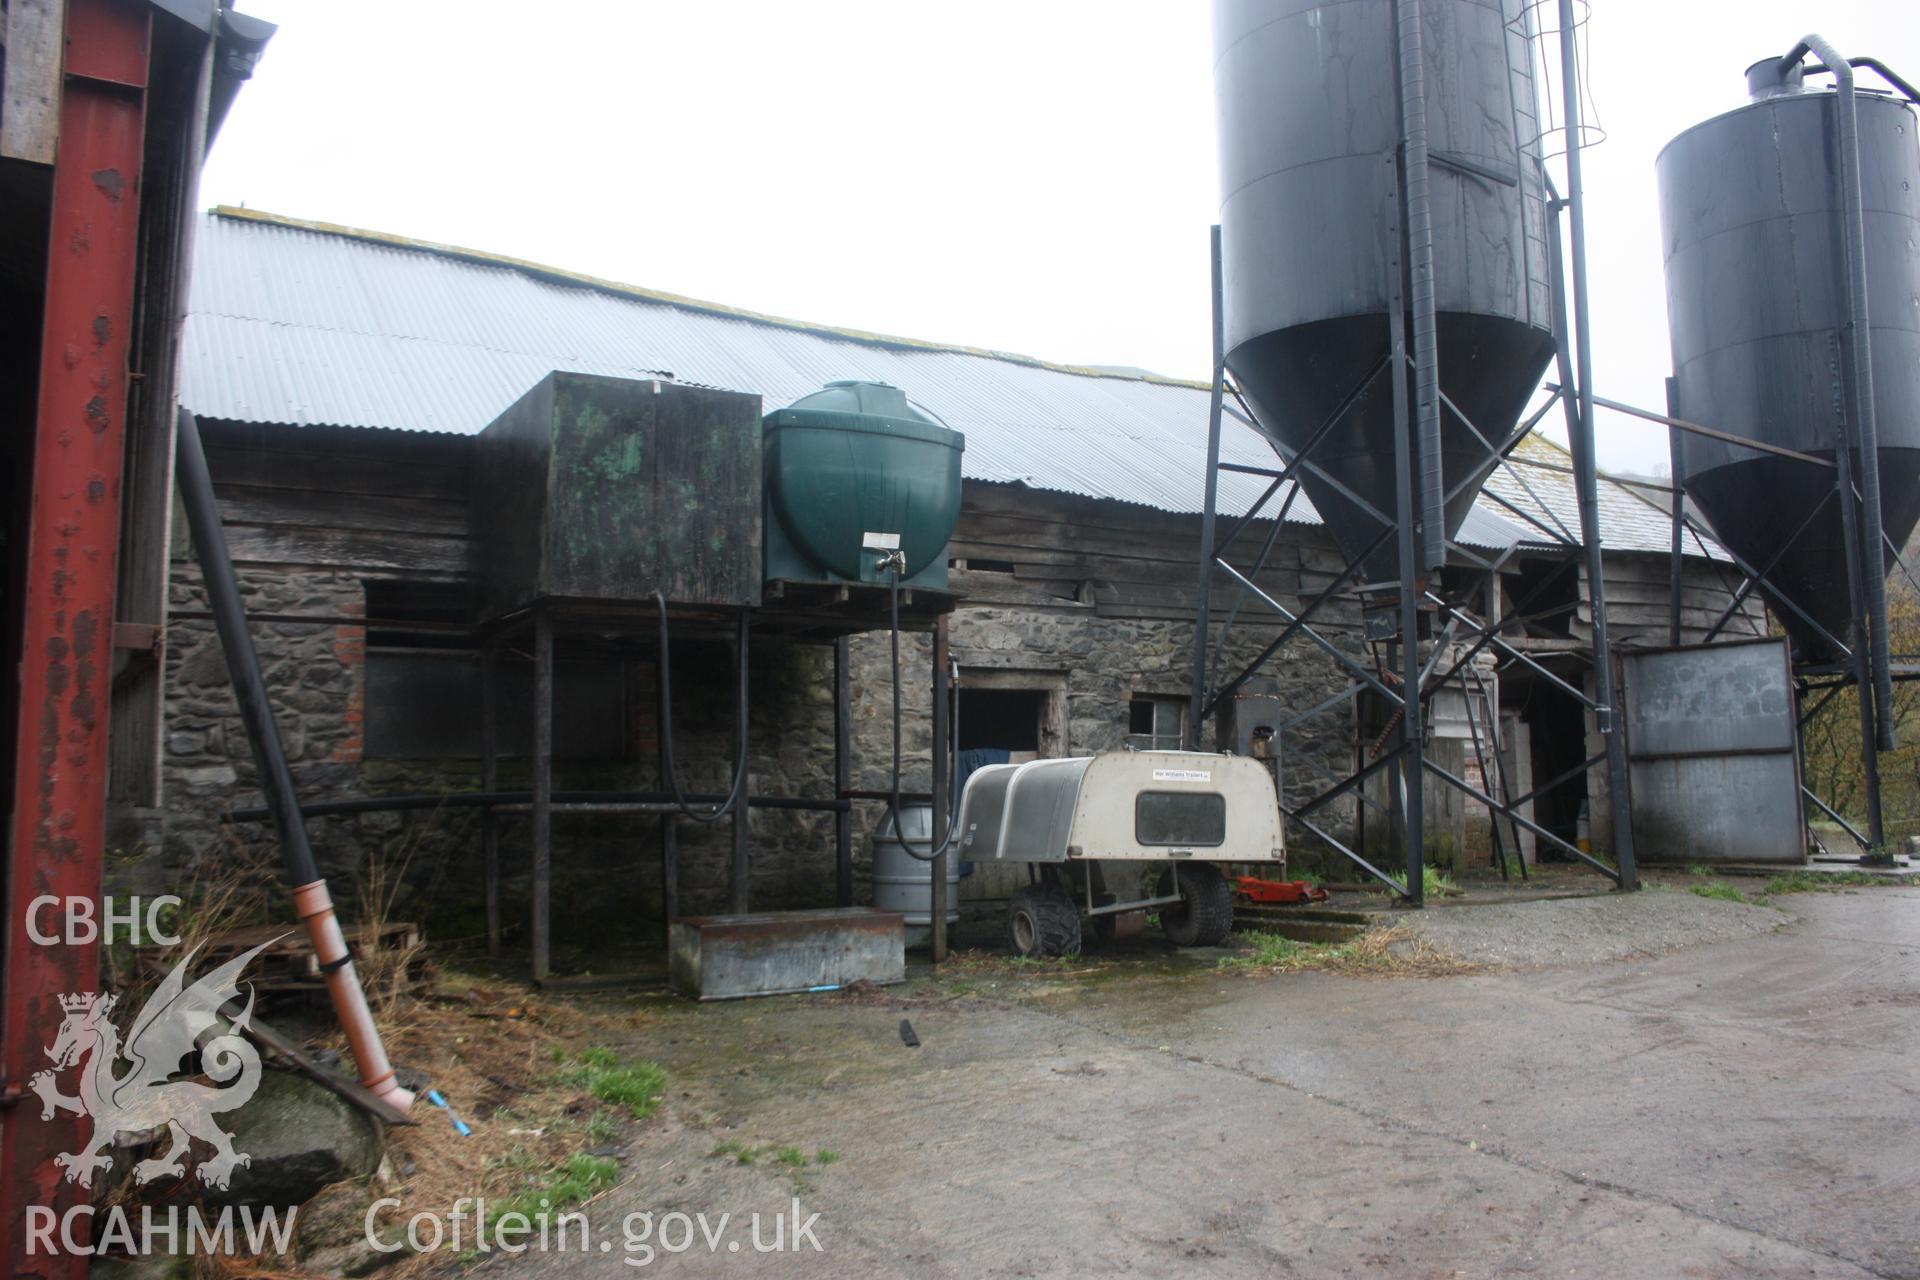 Exterior view of shed or barn with agricultural silos and oil tanks. Photographic survey of Glanhafon-Fawr Farmstead conducted by Geoff Ward on 4th November 2010.